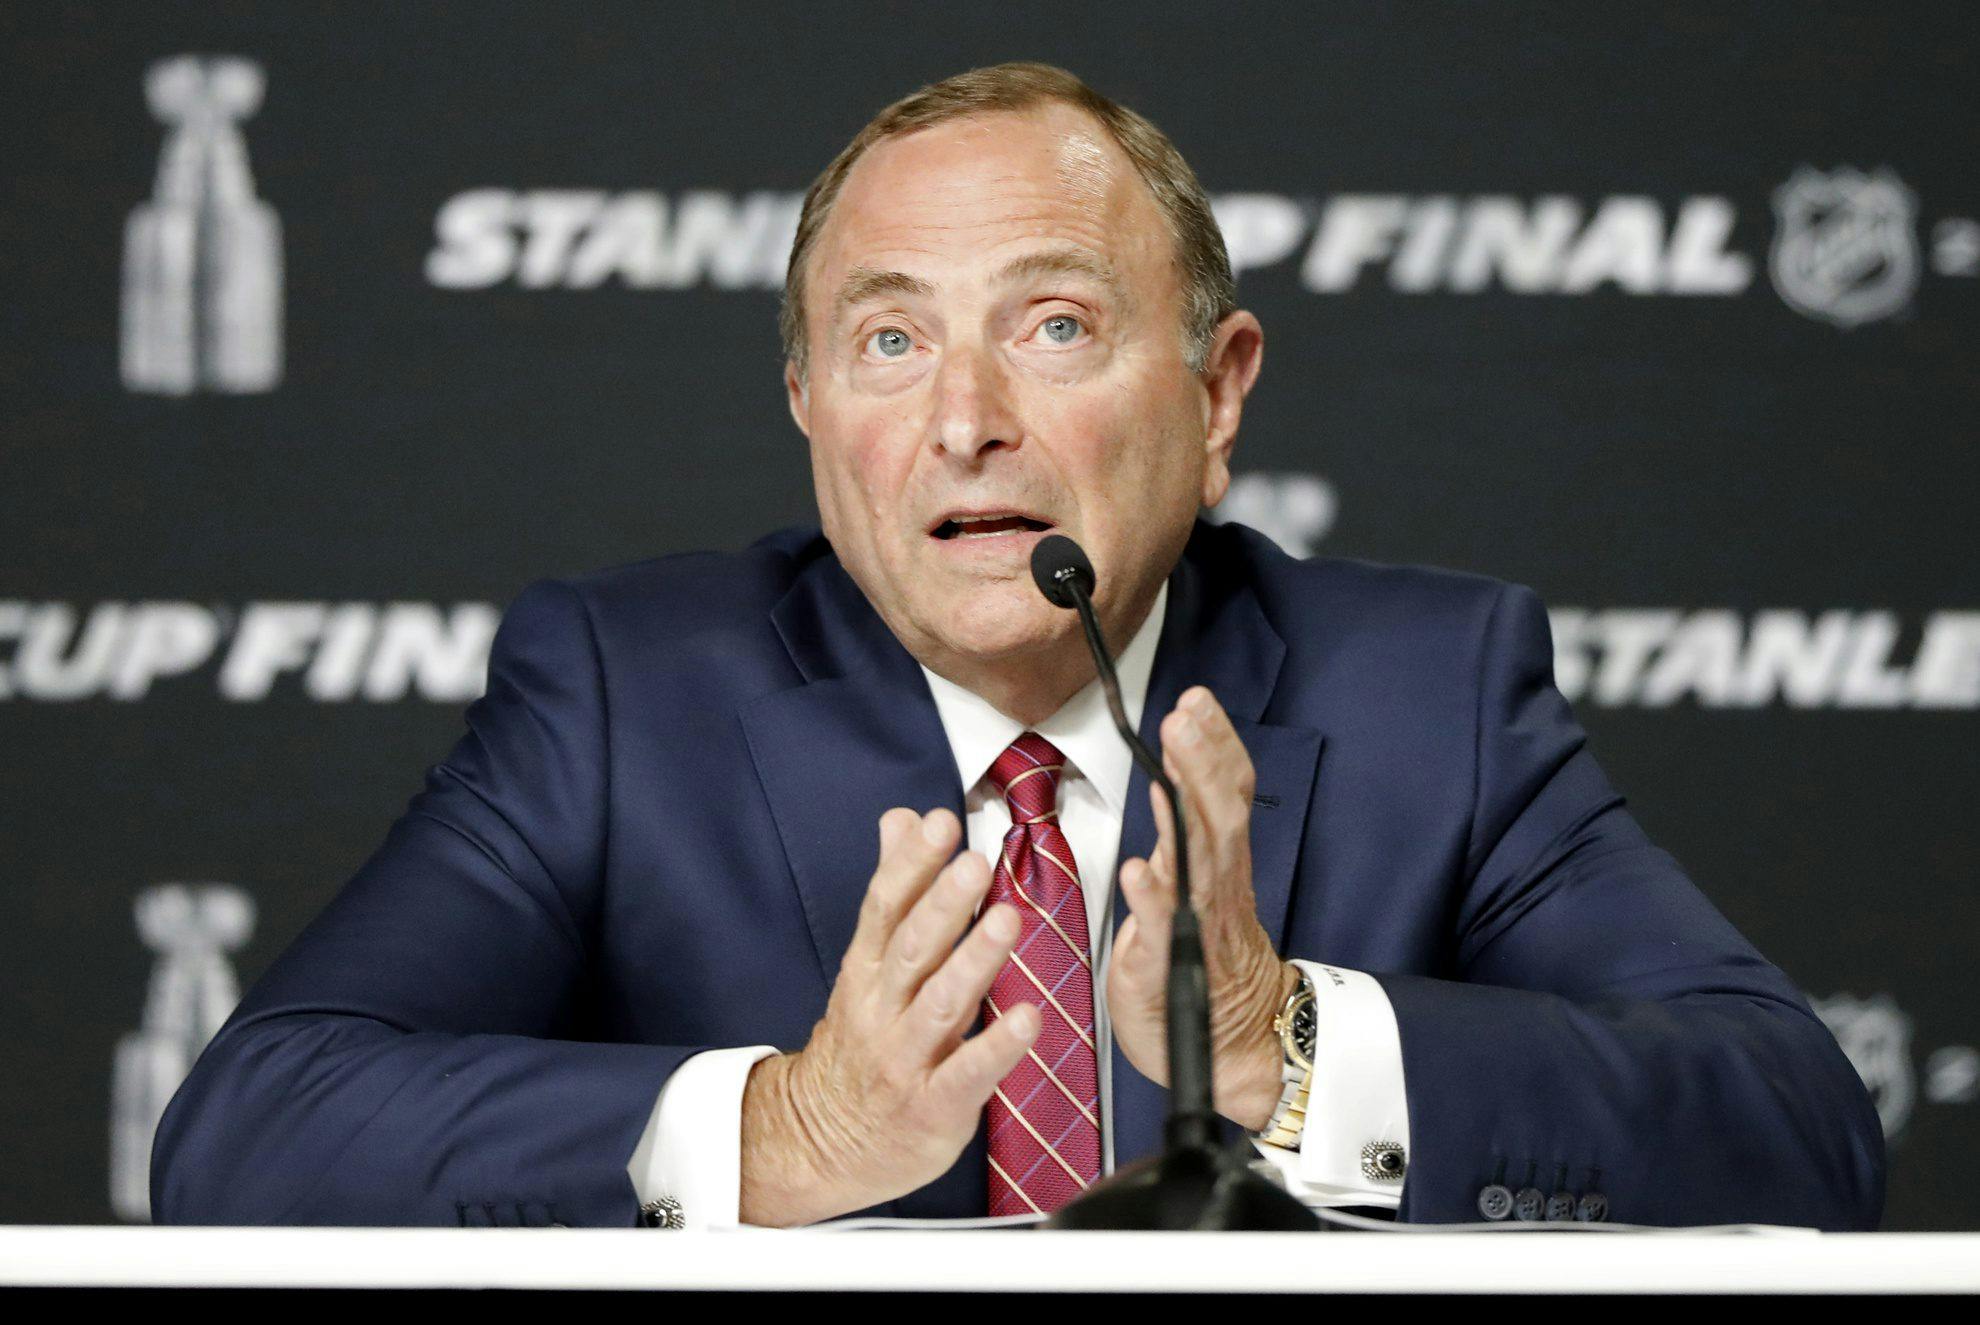 Gary Bettman: ‘Very preliminary’ cap projections between $87M-$88M for 2024-25